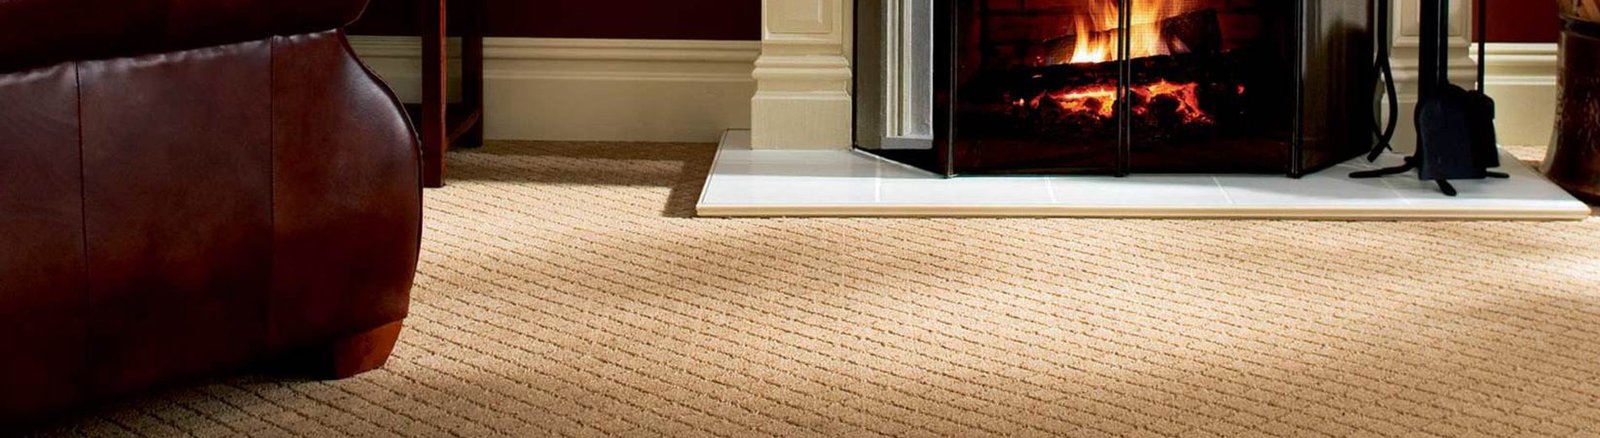 Carpet steam cleaning Adelaide